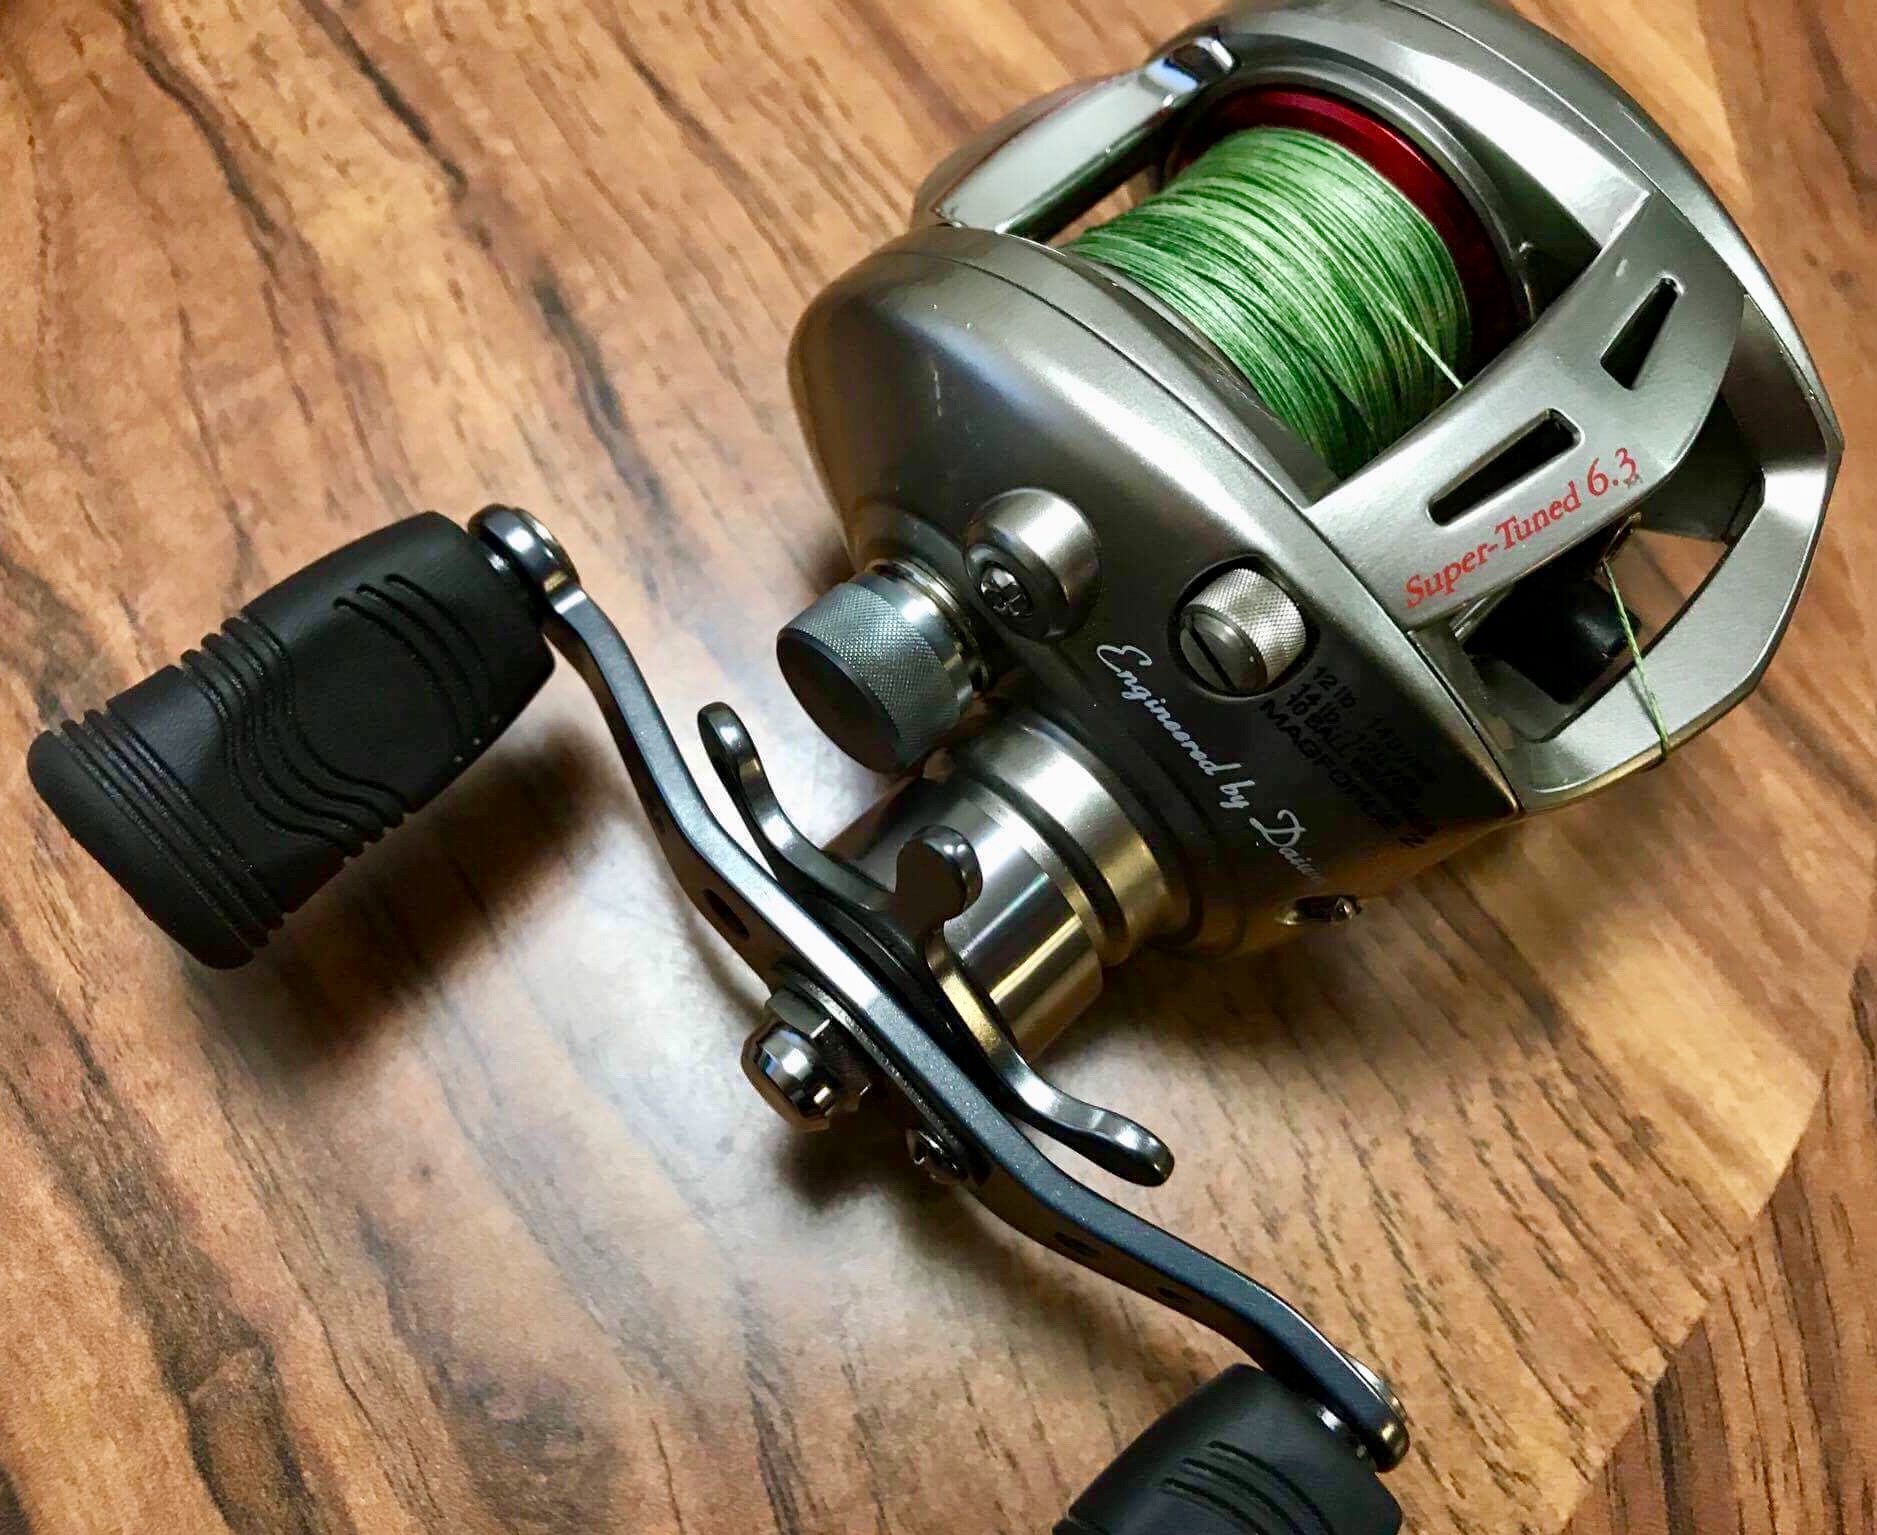 Daiwa Super Tuned - Fishing Rods, Reels, Line, and Knots - Bass Fishing  Forums